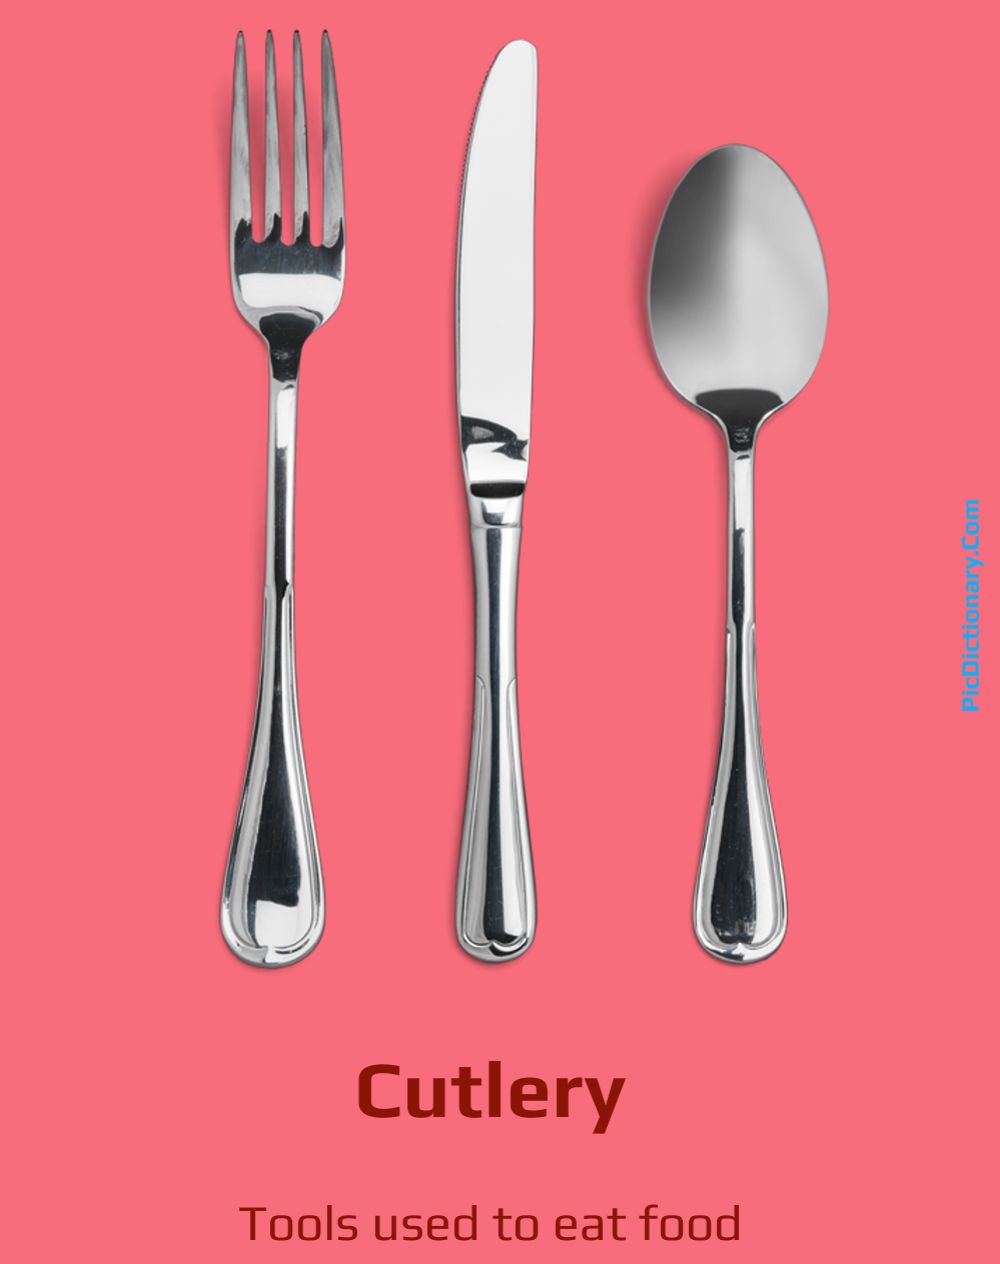 Dictionary meaning of Cutlery